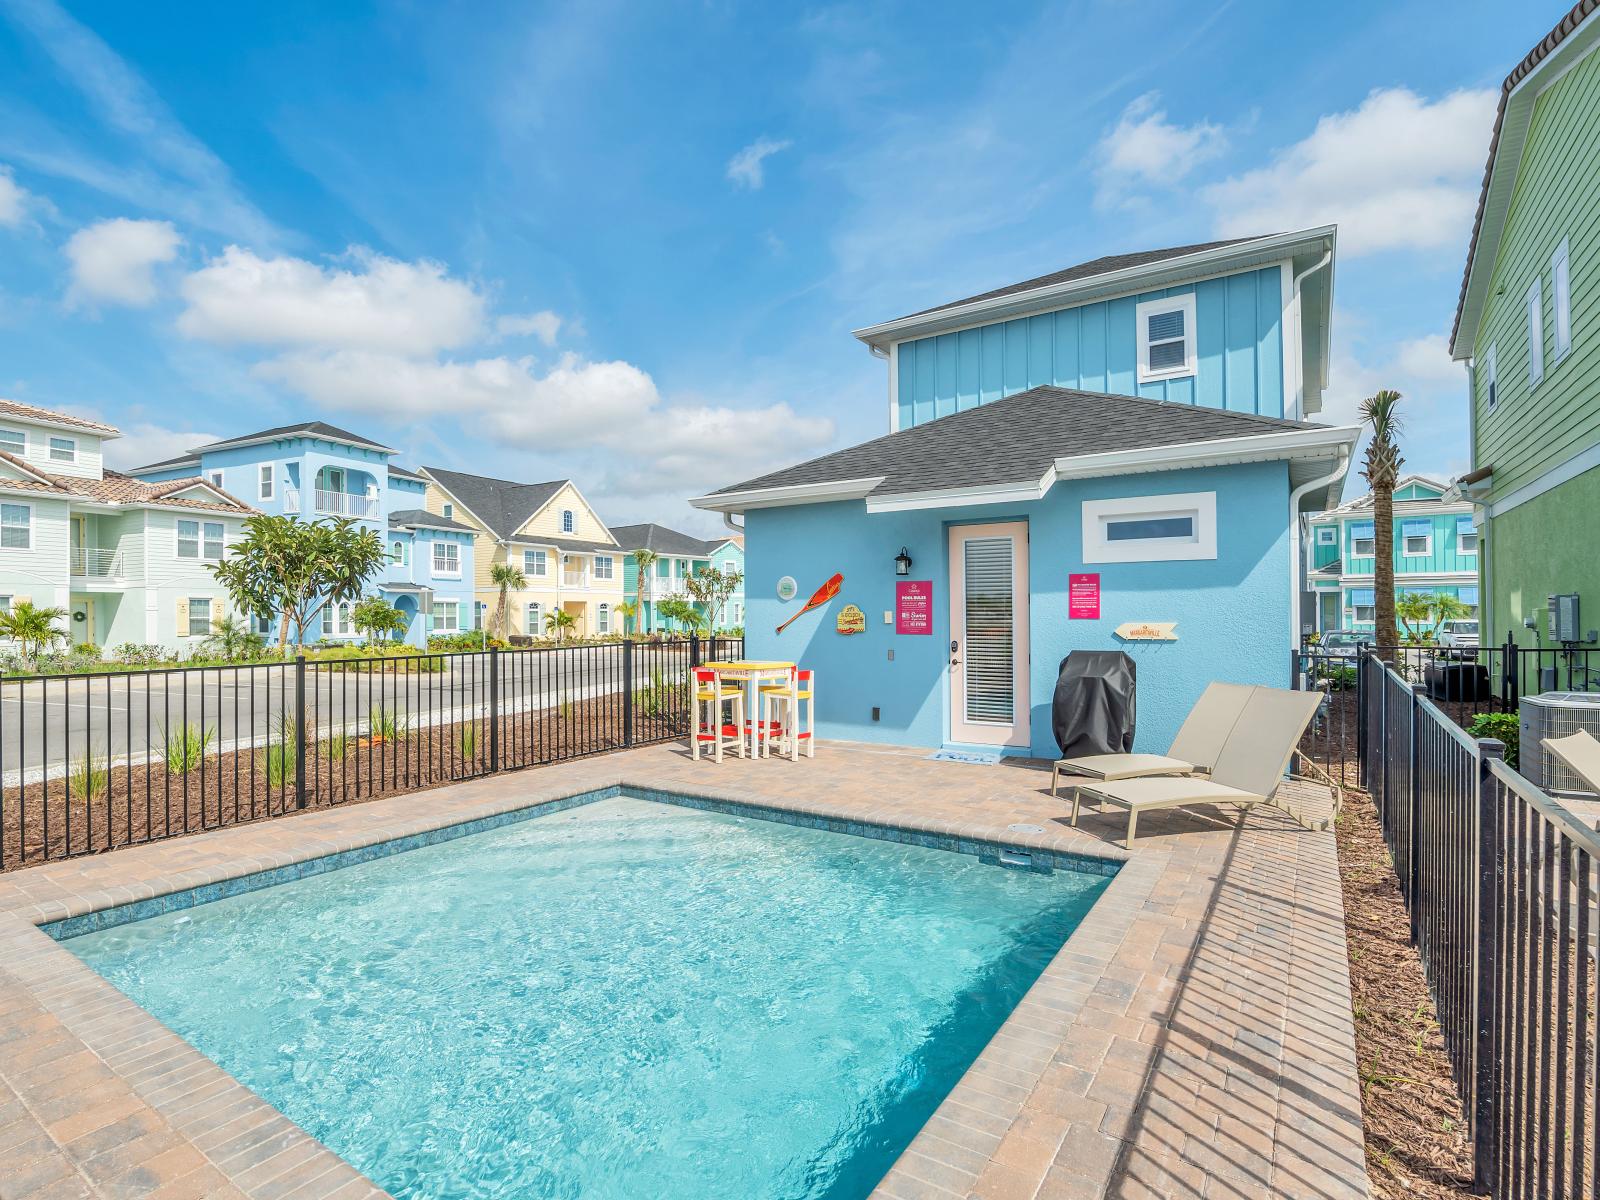 2. Margaritaville Cottage Home Rental with Private Pool